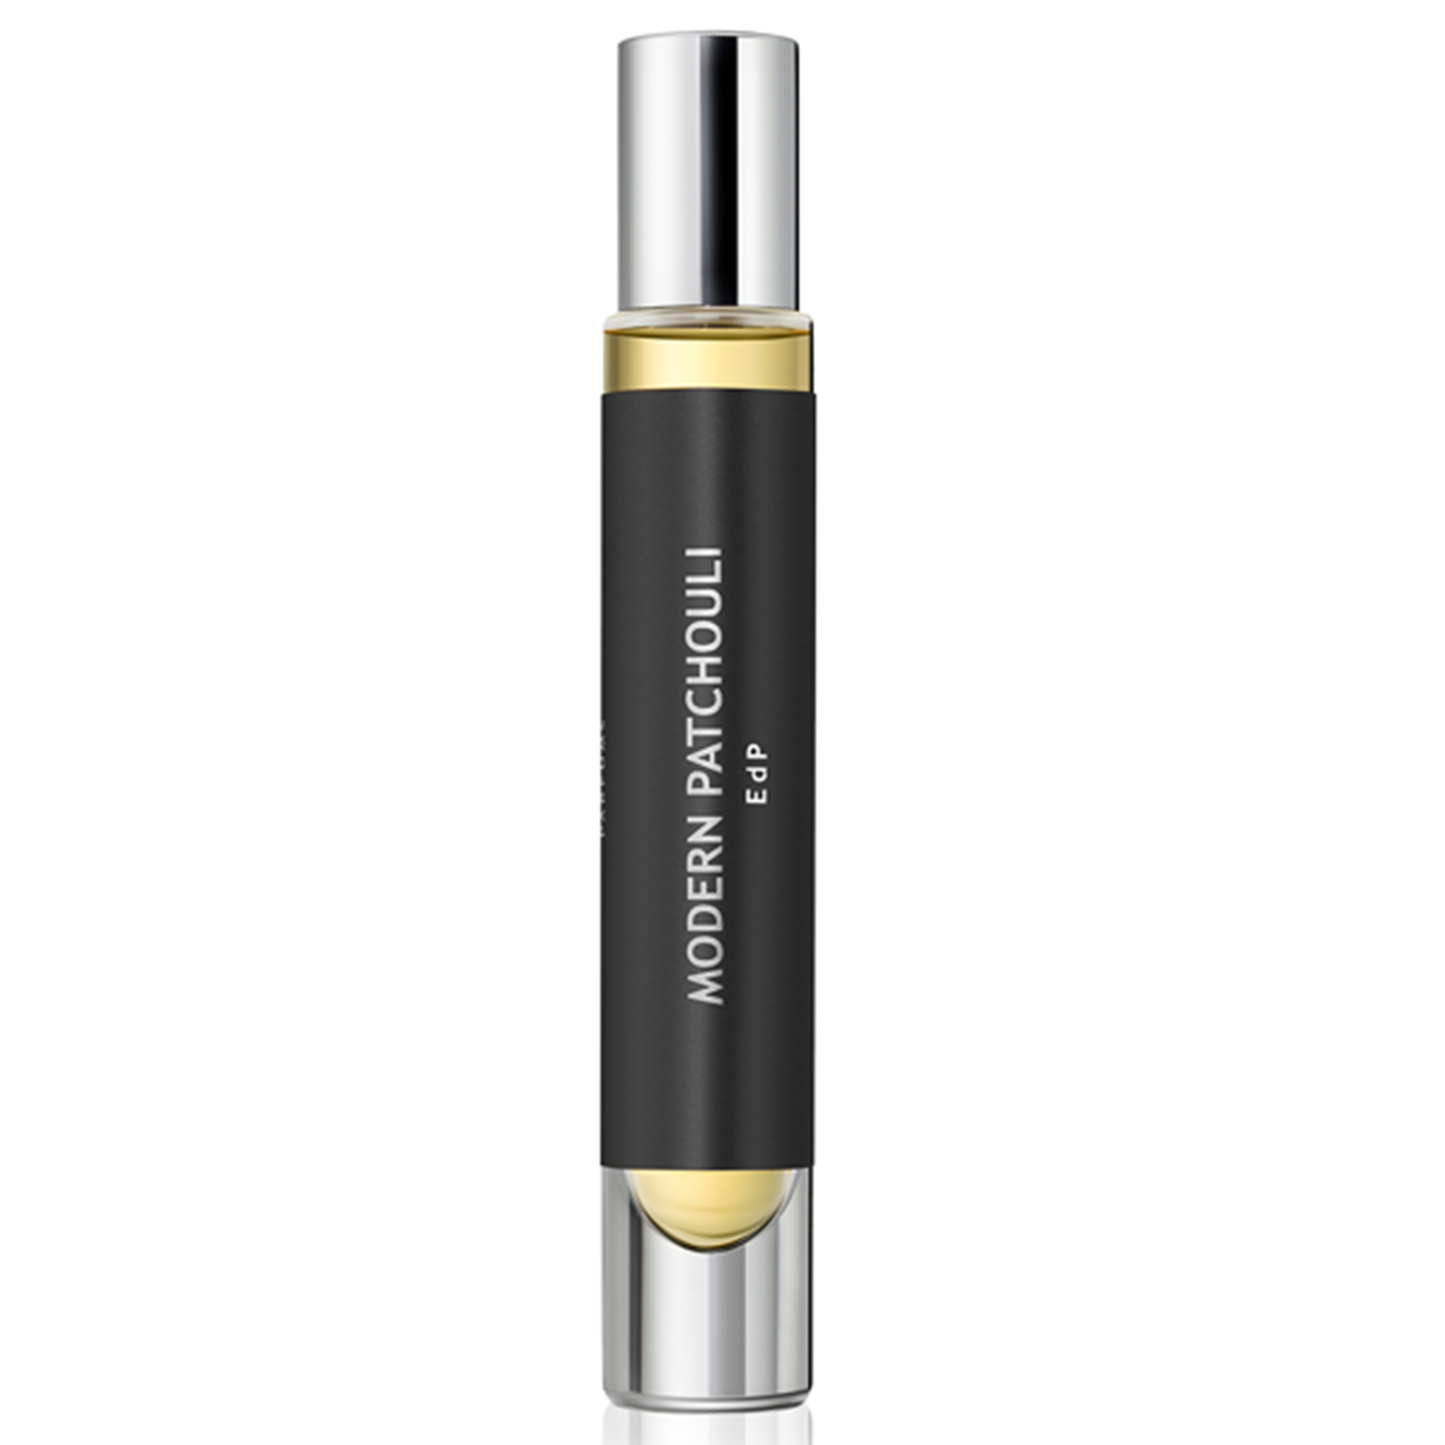 RESERVAR Therapeutate Parfums - Modern Patchouli EdP 10 mL